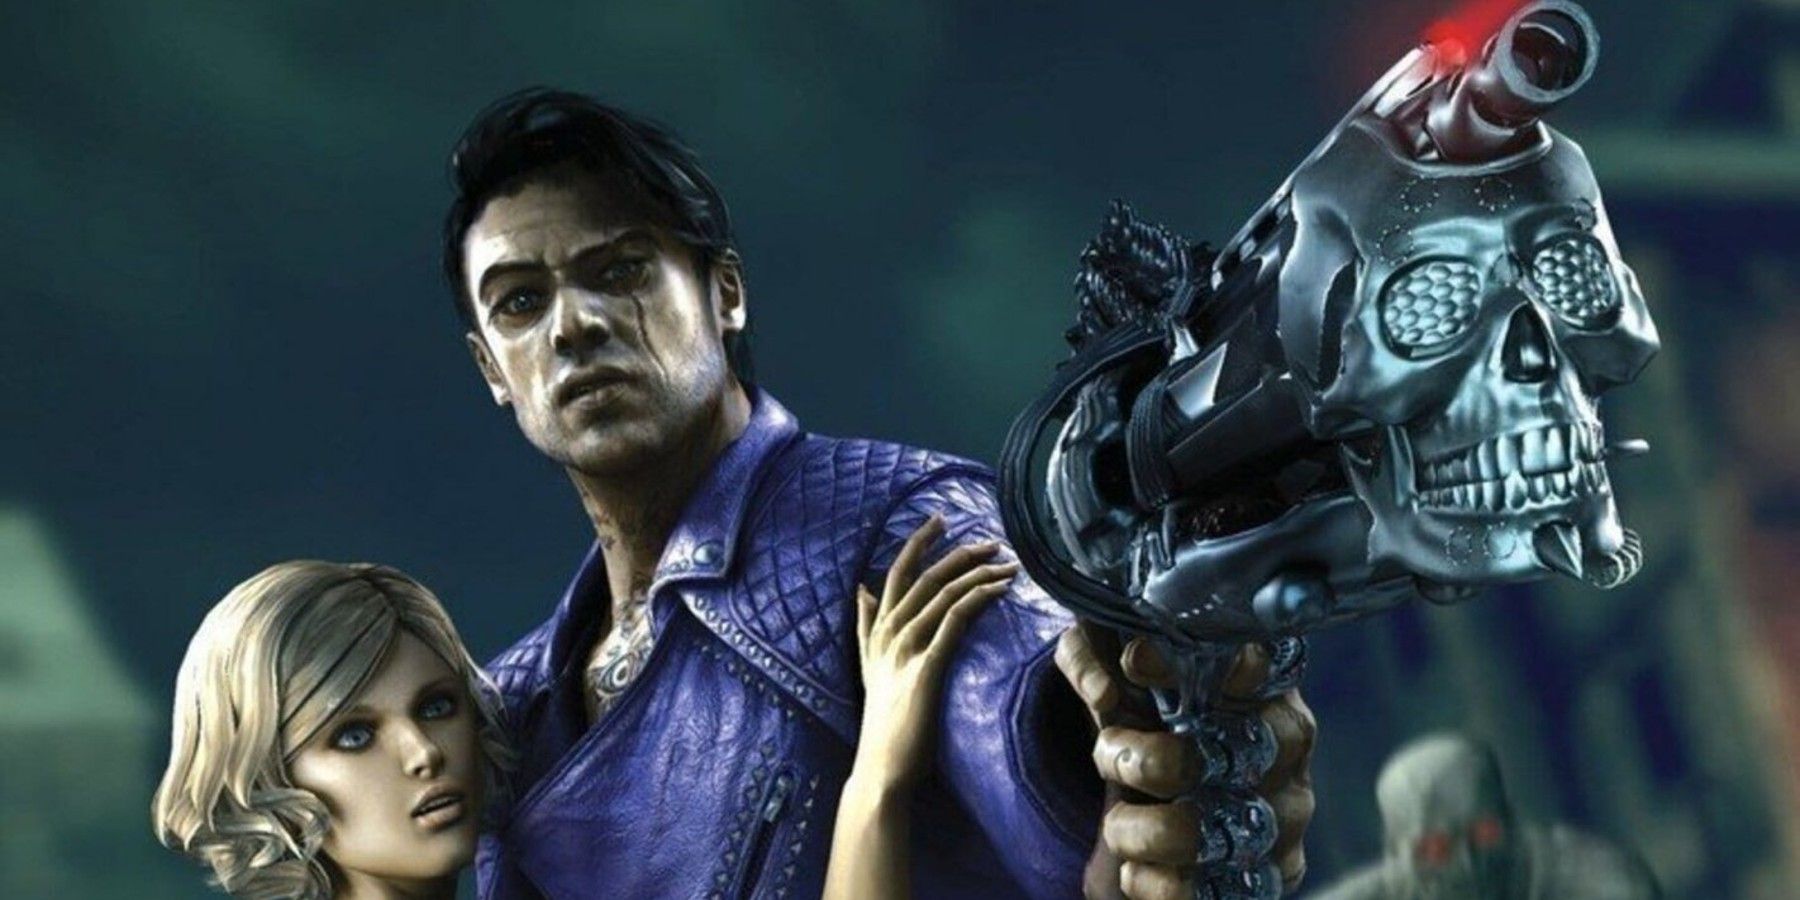 Shadows-of-the-Damned-Suda51-Sequel-Tease-